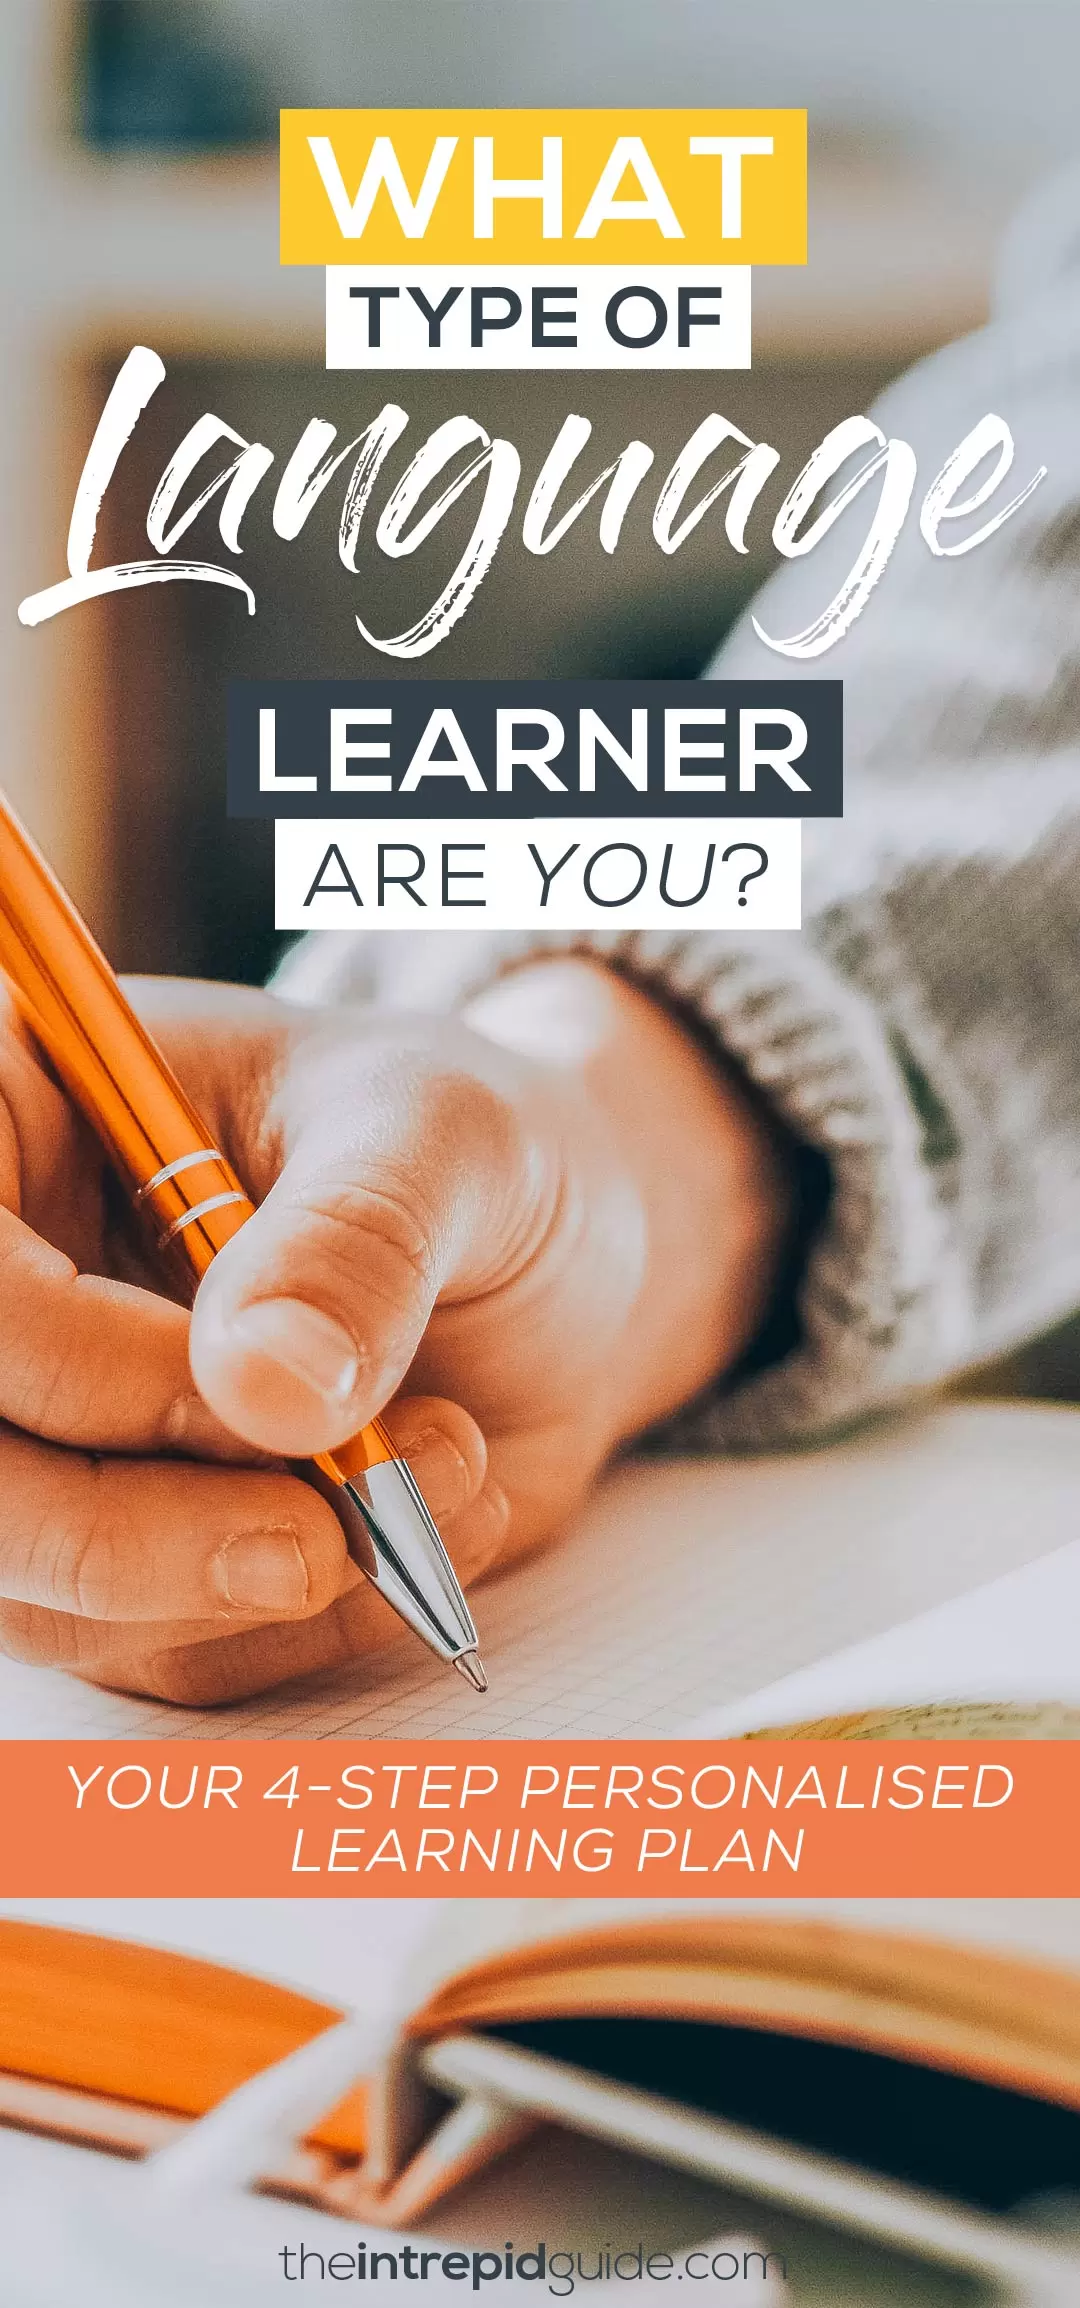 What Type of Language Learner Are You? Your 4-Step Personalised Learning Plan